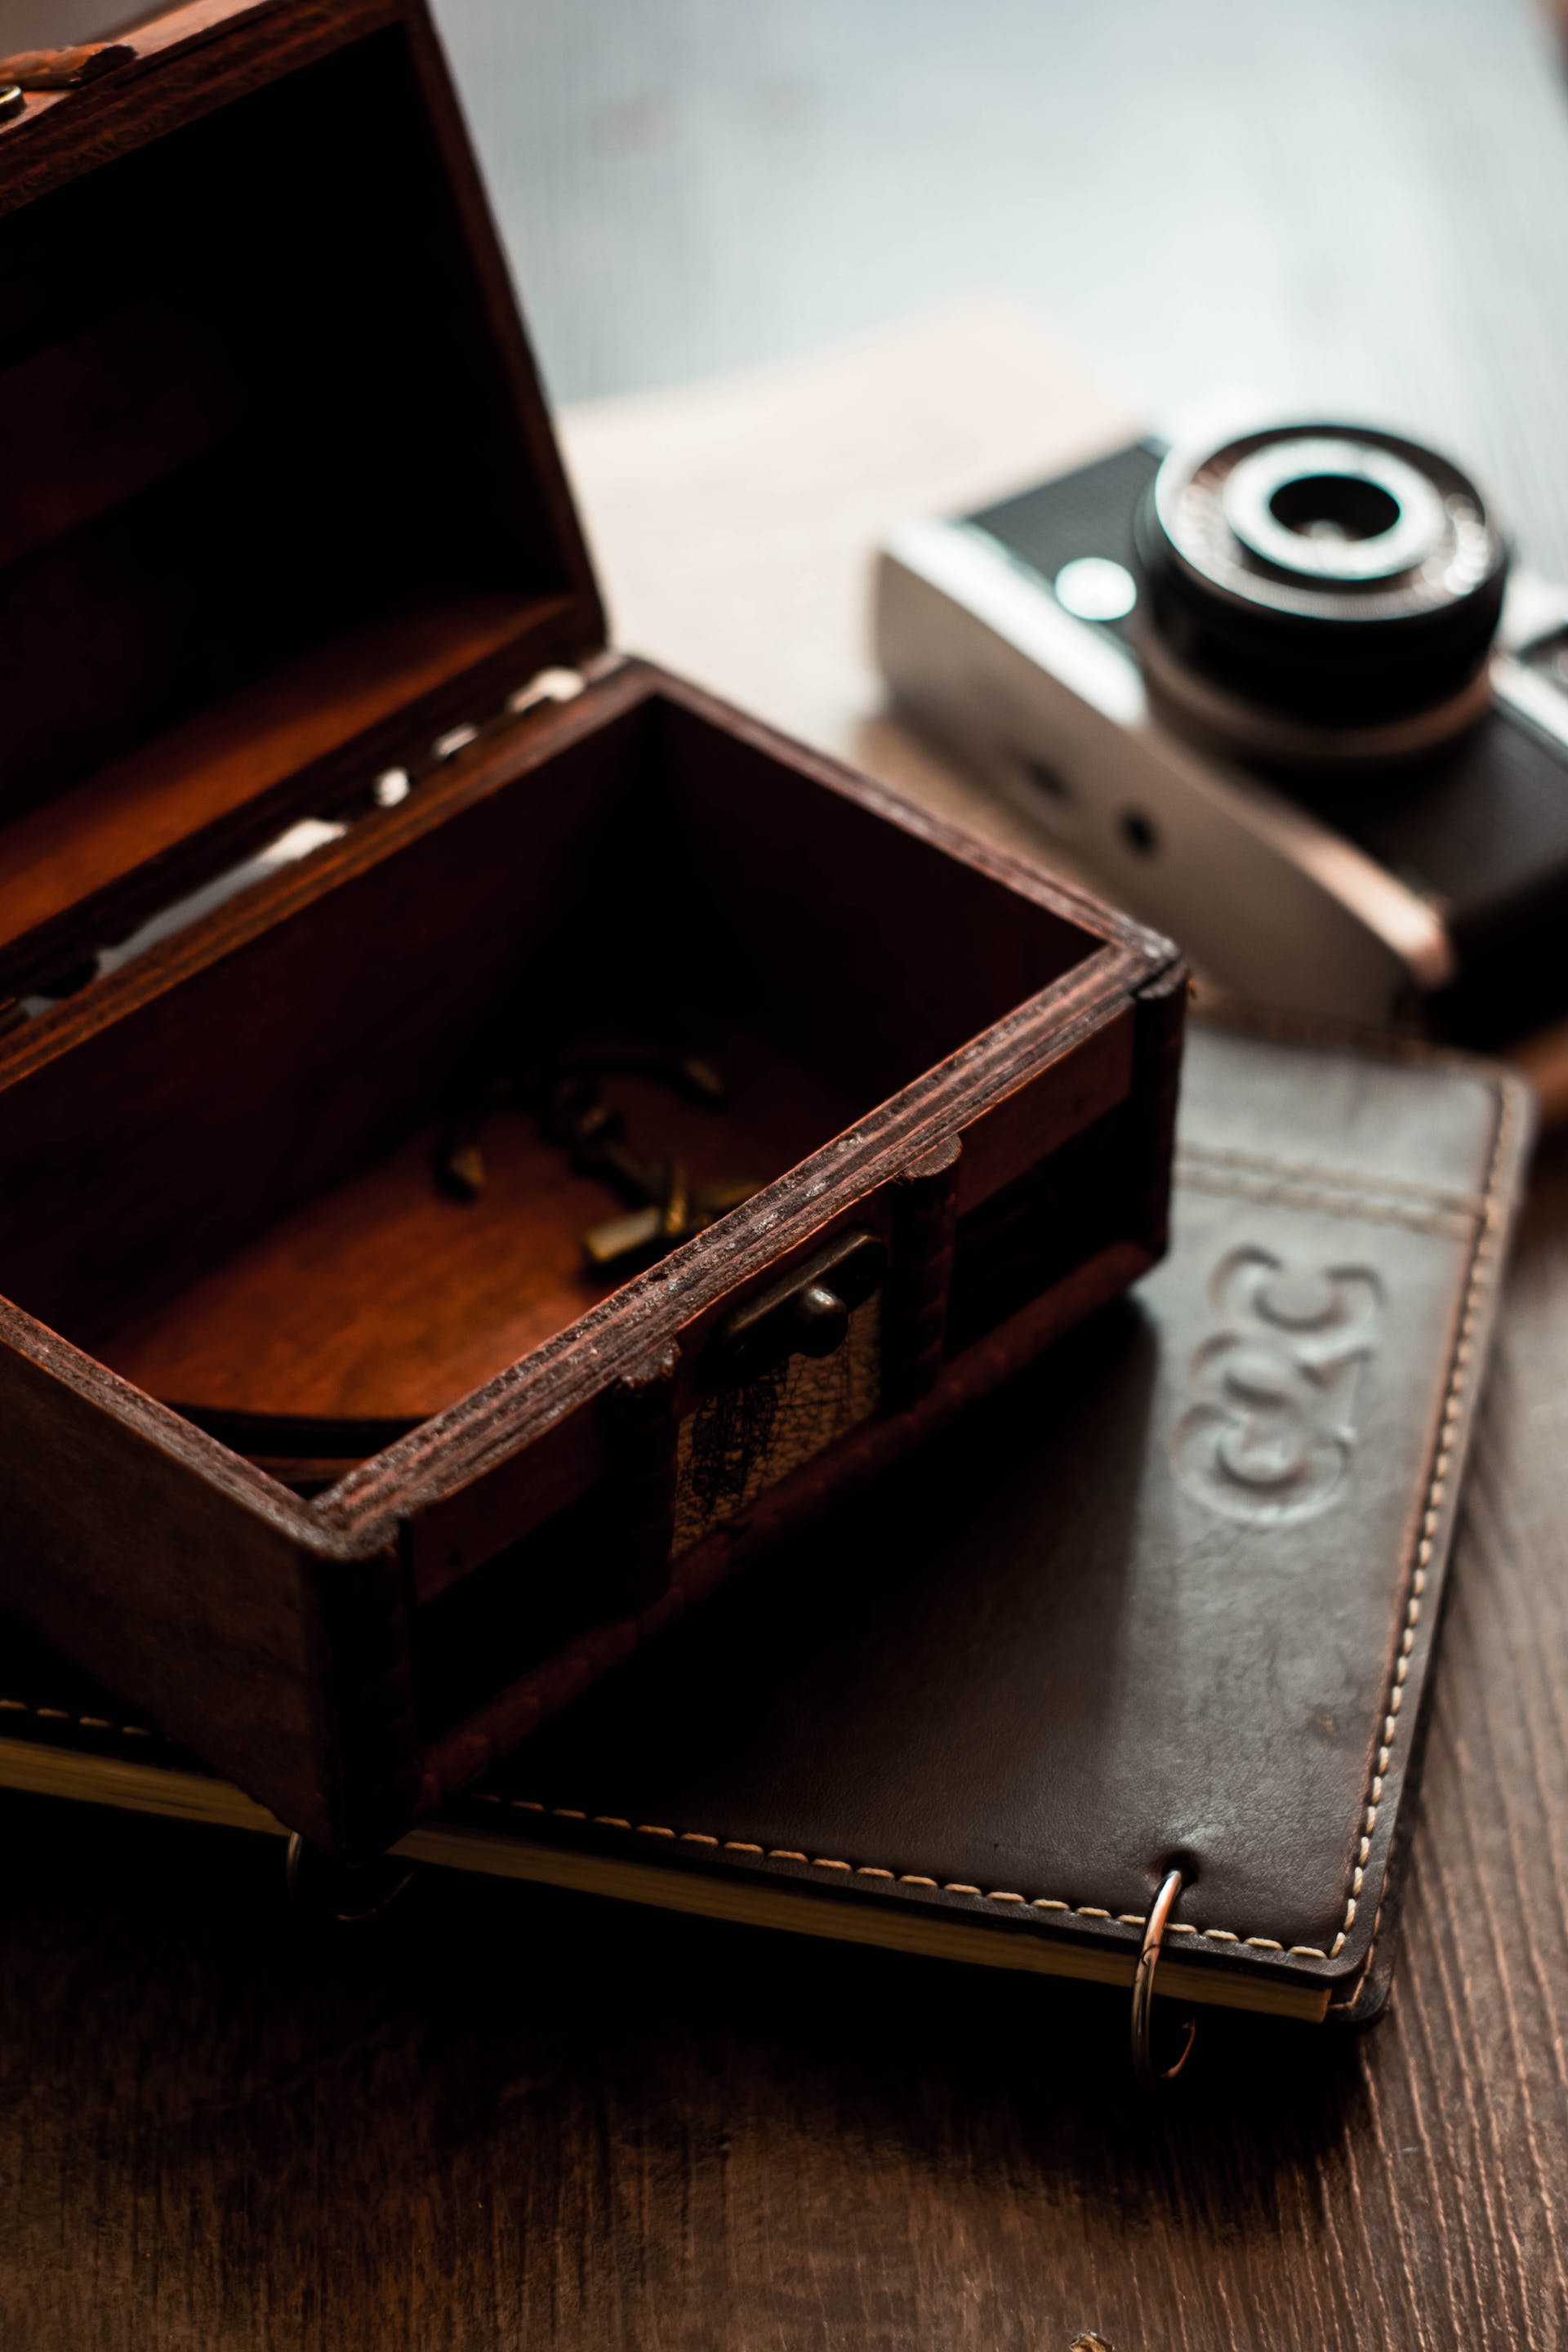 An open wooden box and a notebook | Source: Pexels